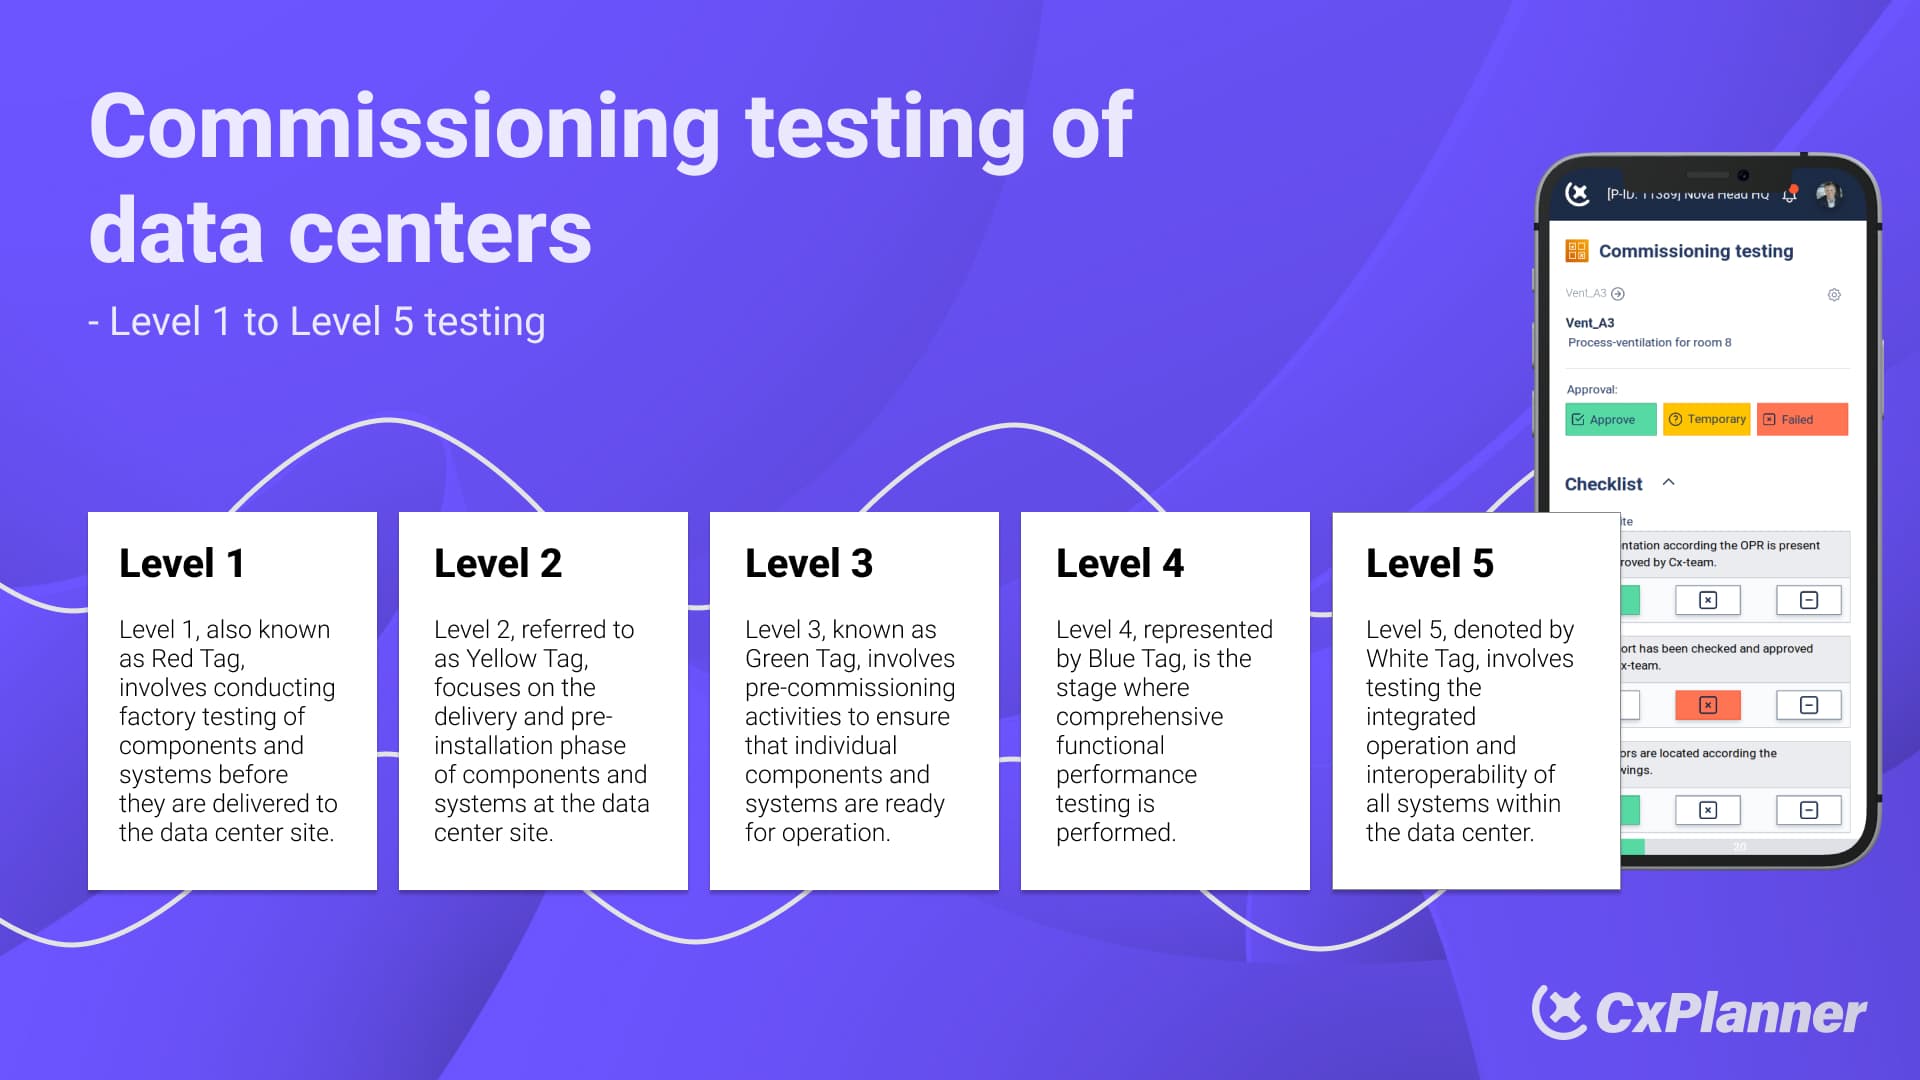 Overview of the commissioning testing of data centers by levels.